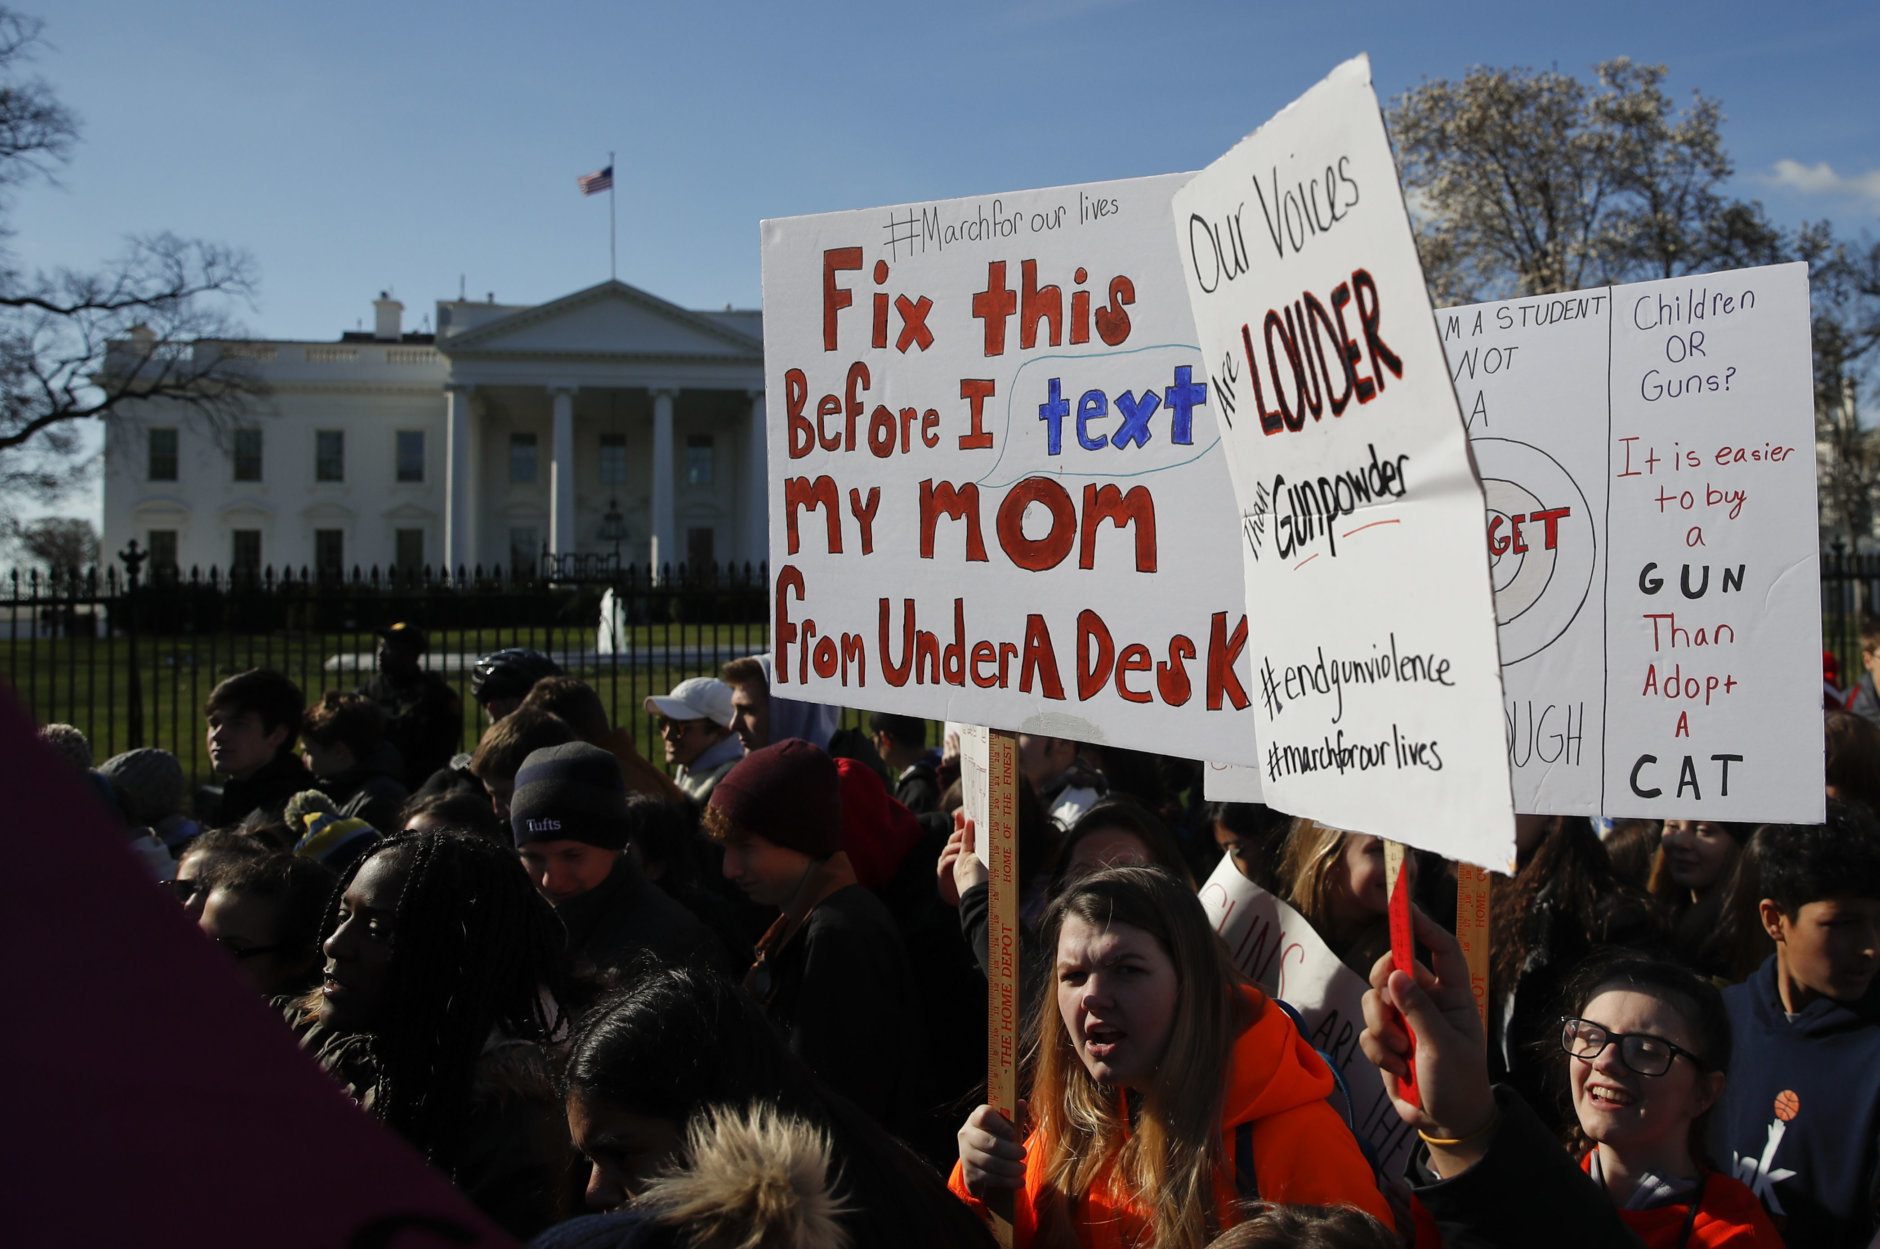 Students rally in front of the White House in Washington, Wednesday, March 14, 2018. Students walked out of school to protest gun violence in the biggest demonstration yet of the student activism that has emerged in response to last month's massacre of 17 people at Florida's Marjory Stoneman Douglas High School. (AP Photo/Carolyn Kaster)